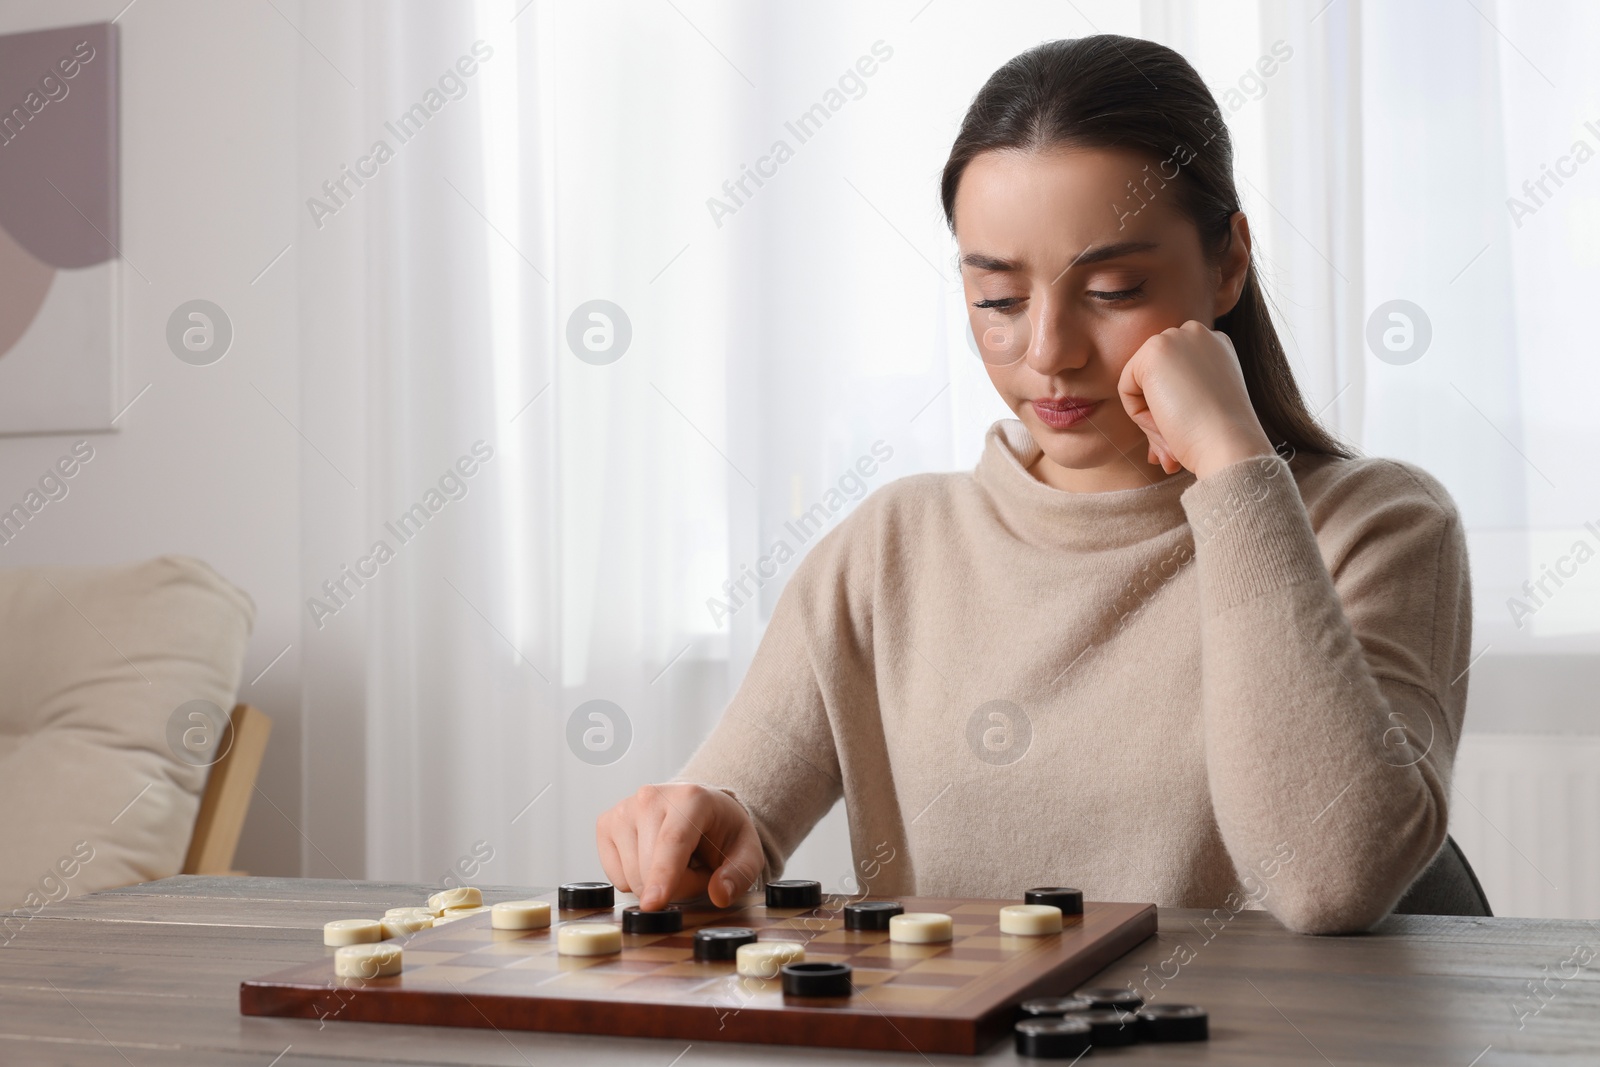 Photo of Playing checkers. Concentrated woman thinking about next move at table in room, space for text